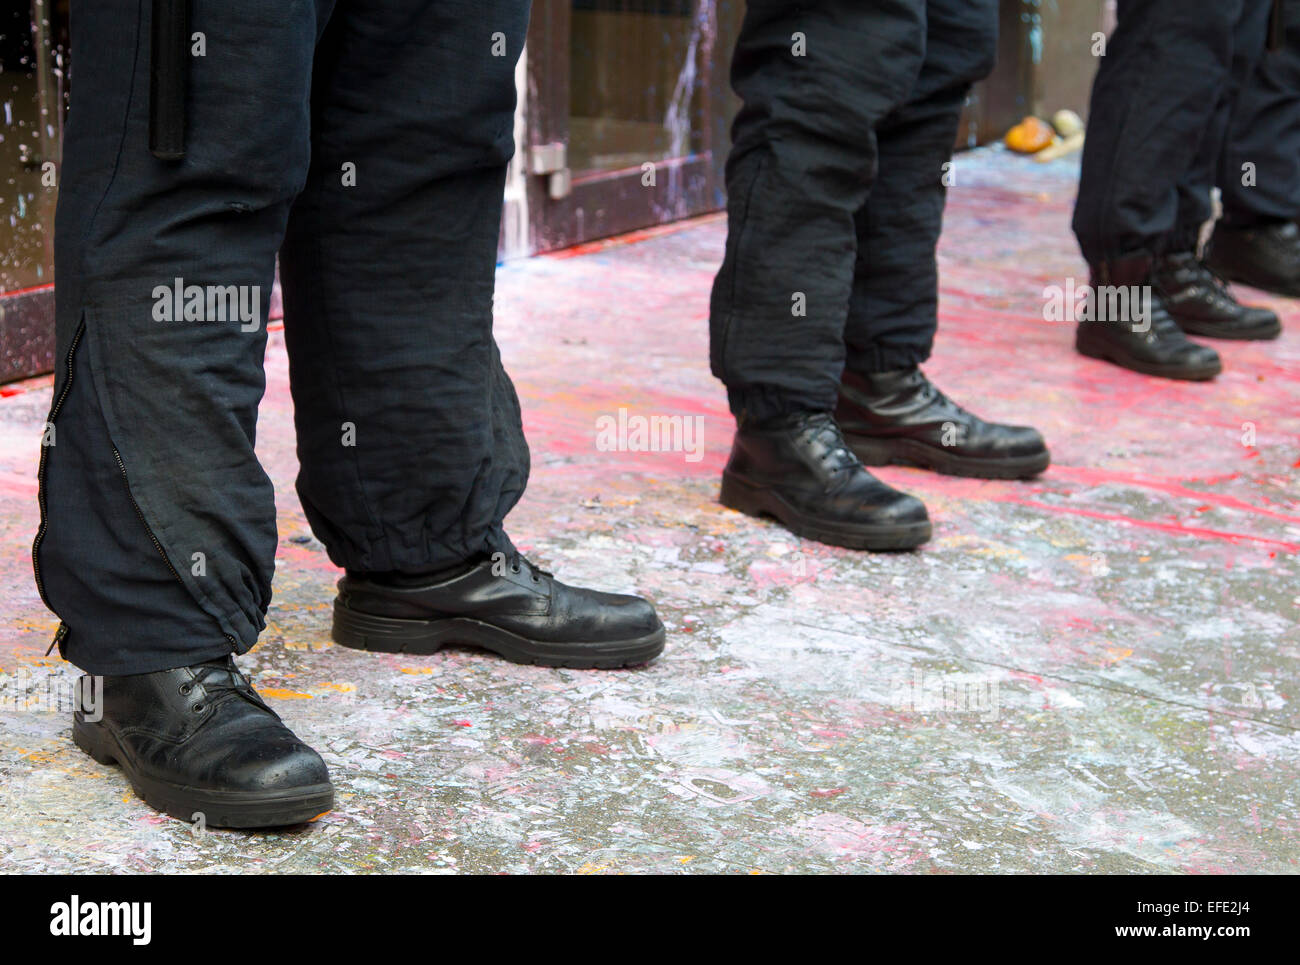 Police officer's boots and trousers.  Officers are guarding Top Shop, Oxford Street during 2011 tax avoidance protest. Stock Photo